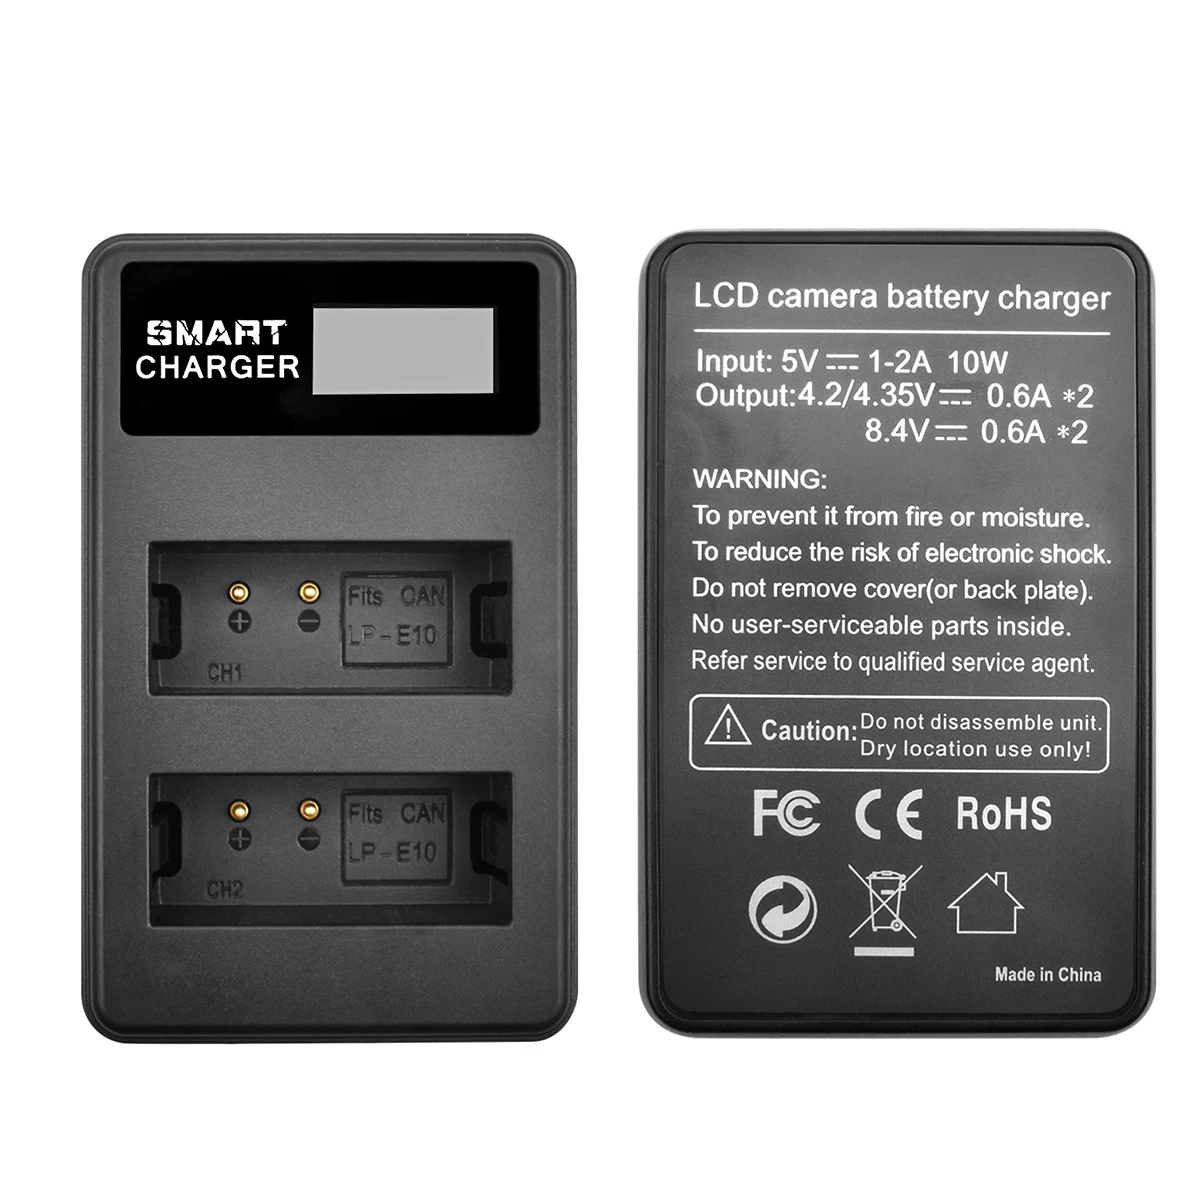 Replacement Digital For Camera Battery And LCD Dual Charger For Canon EOS Rebel T6,T3,T5,4000D,3000D,2000D,1300D,1200D,1100D images - 6